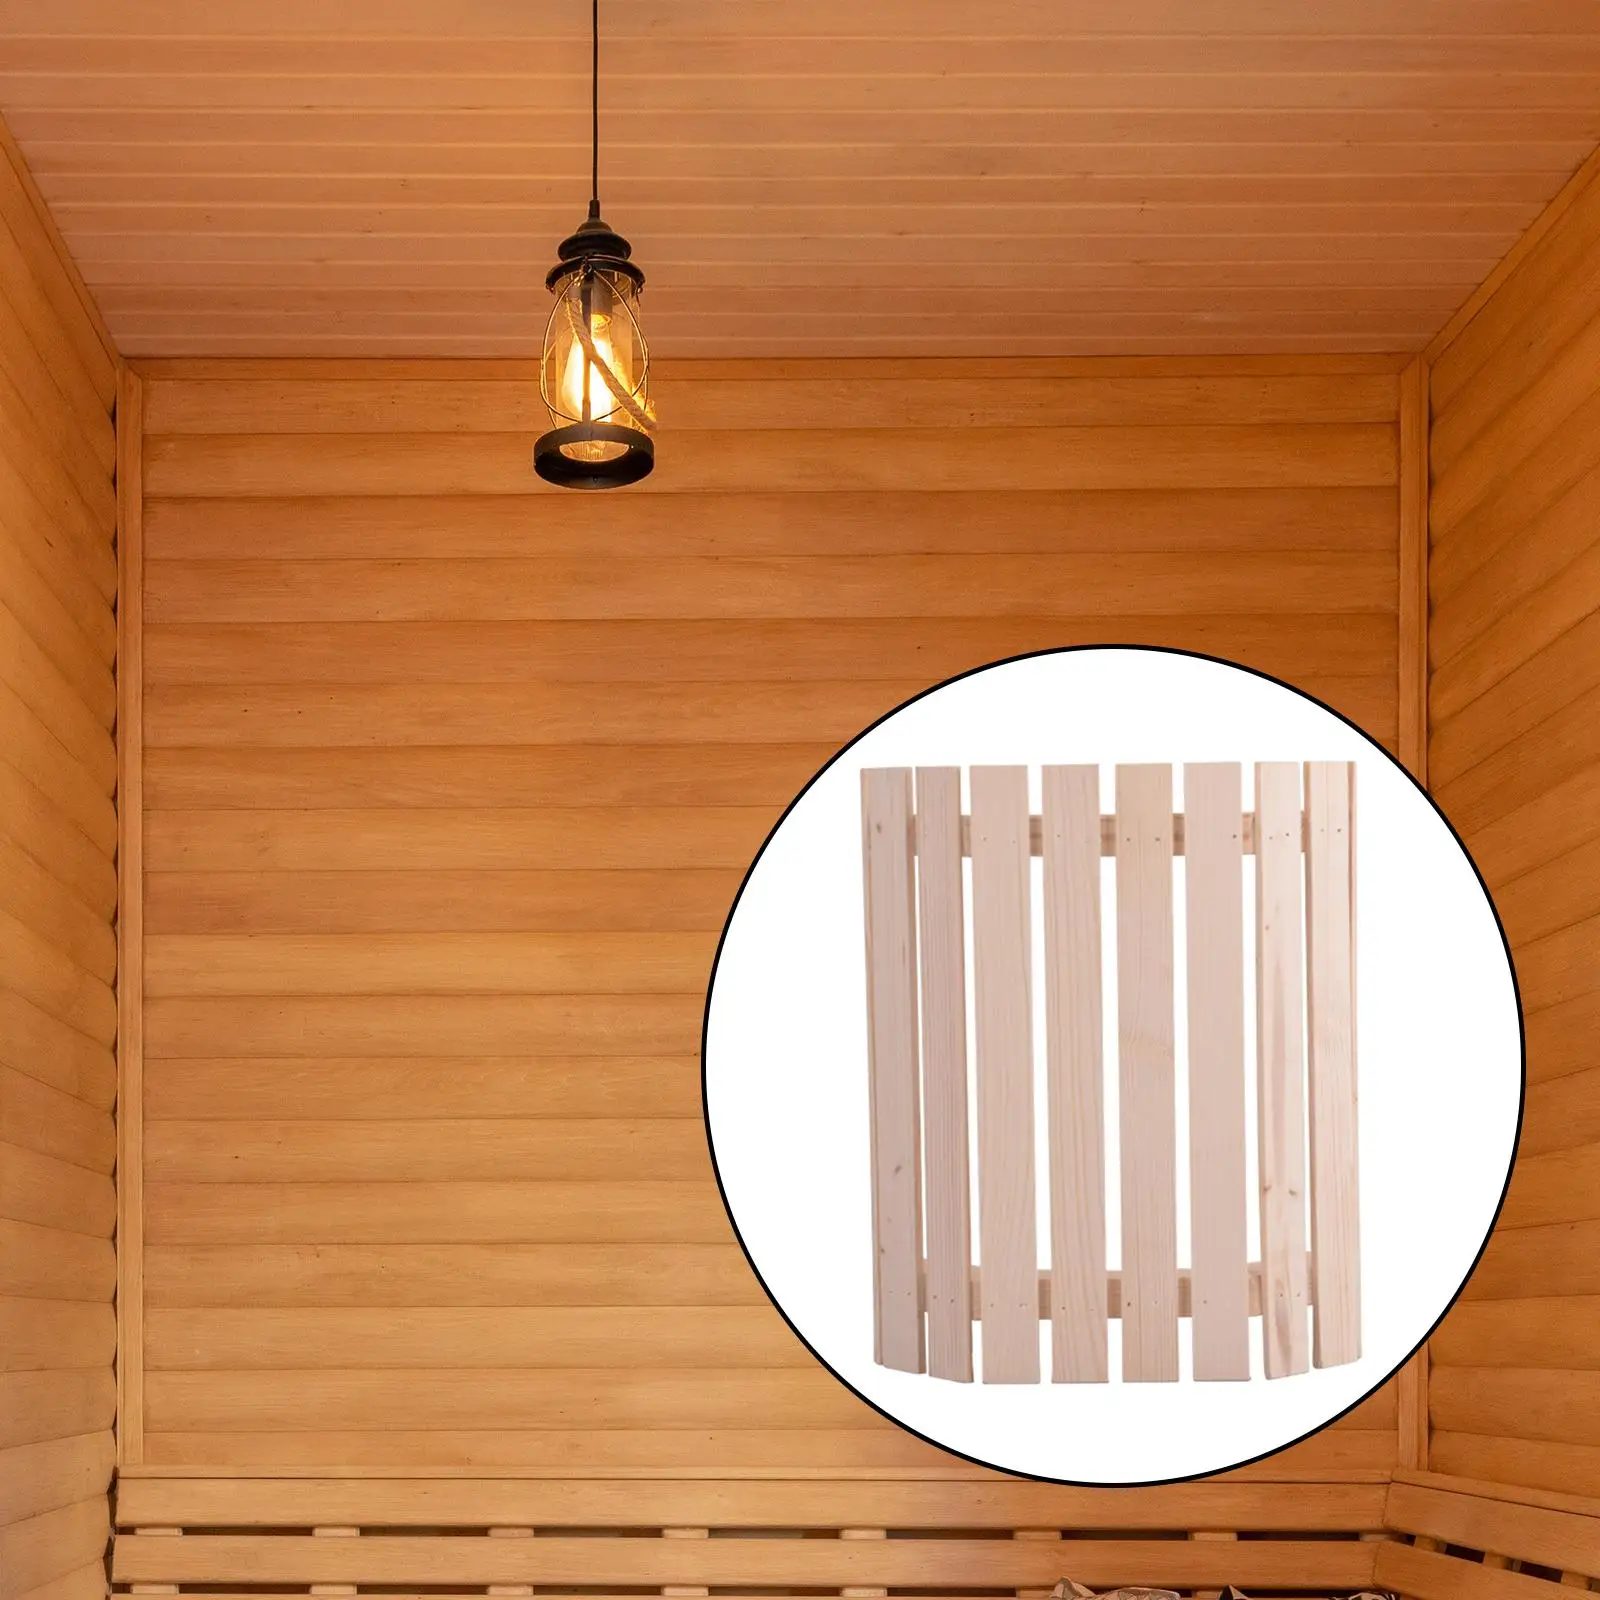 Wood Lamp Shade SPA Accessories Vintage Style Steam Room Lampshade Light Shade for Steam Room Sauna Room